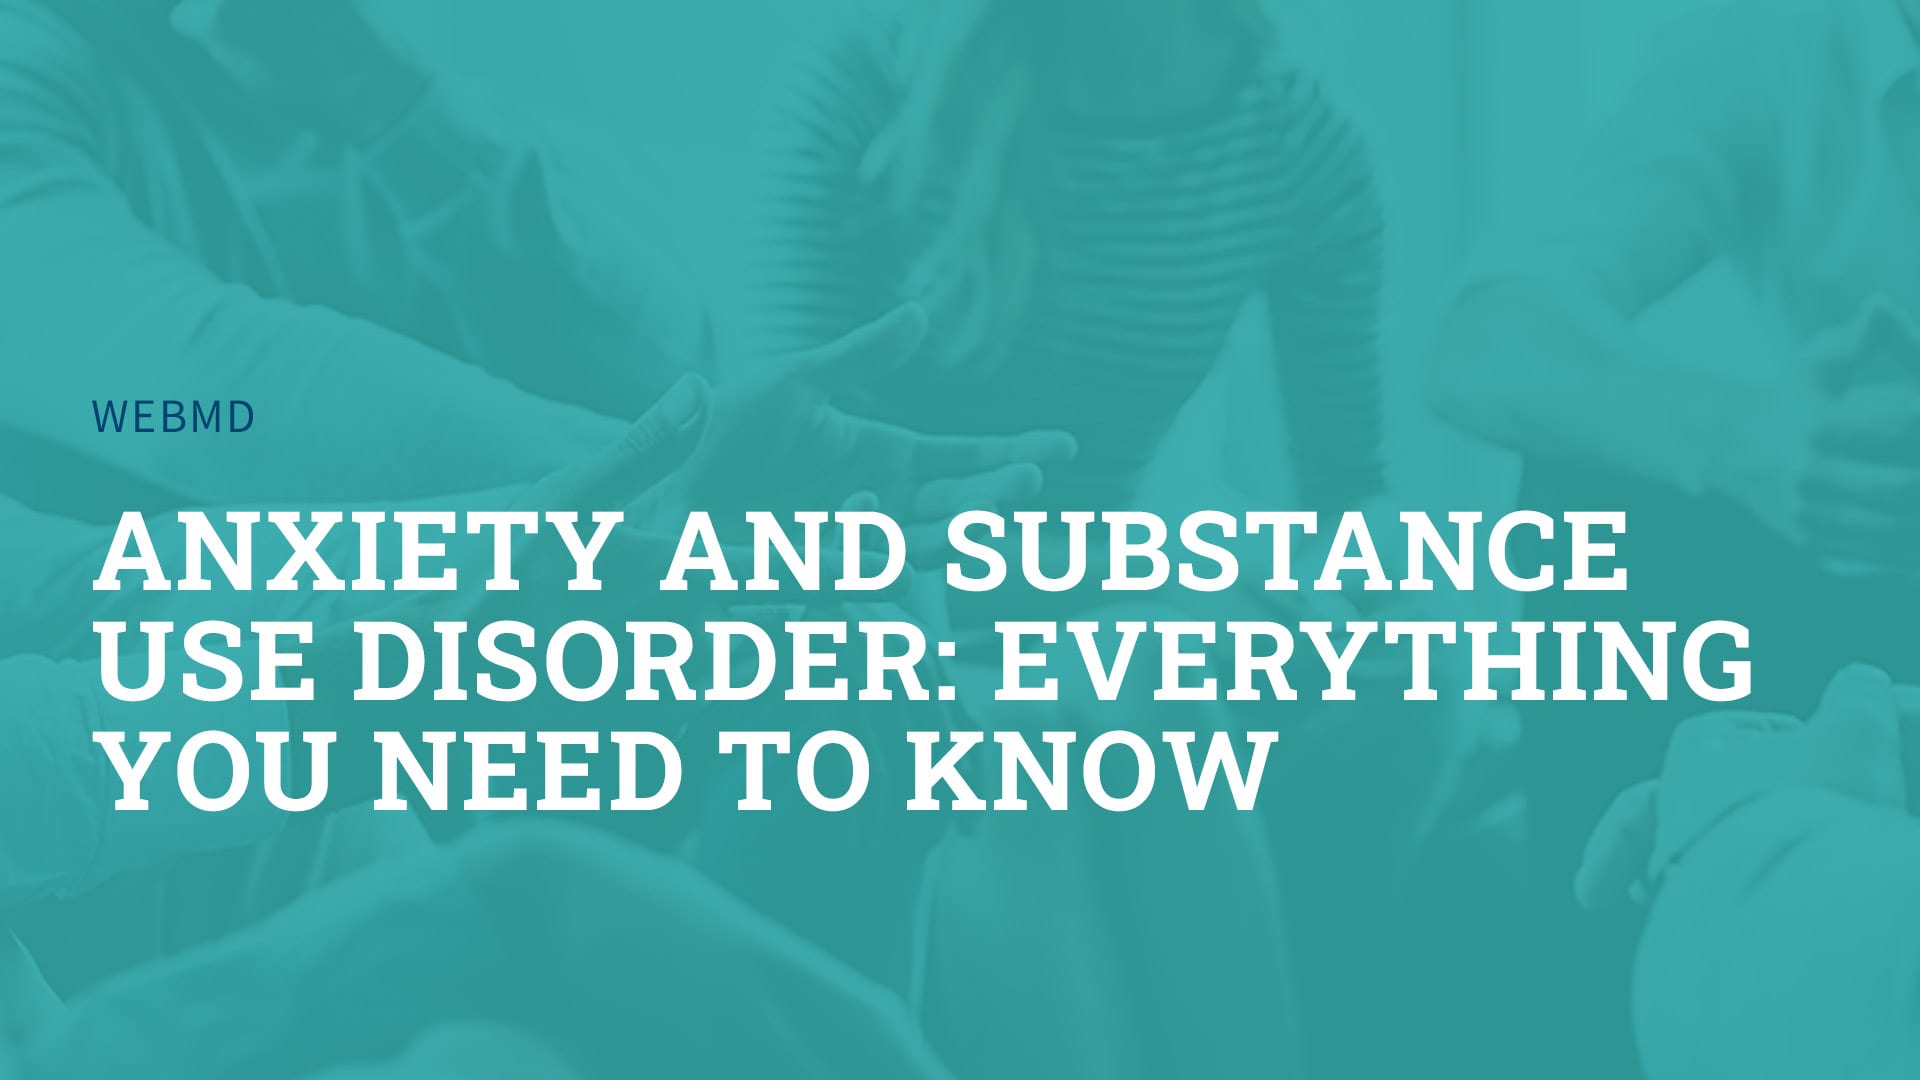 WebMD anxiety and substance use disorder